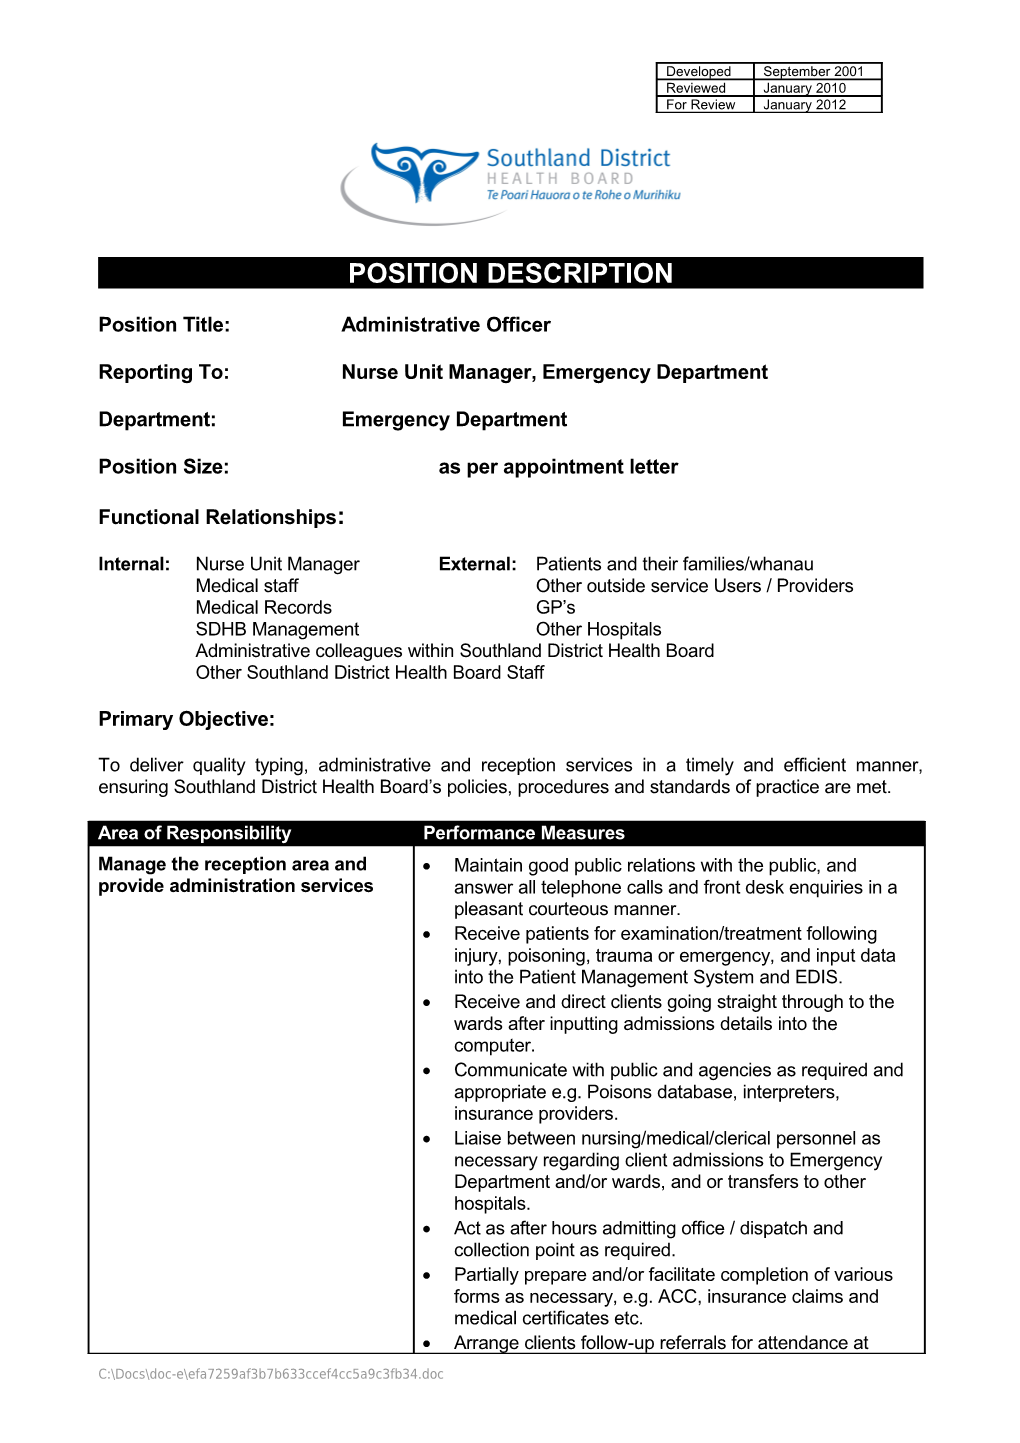 Administrative Officer, Emergency Department - Page 1